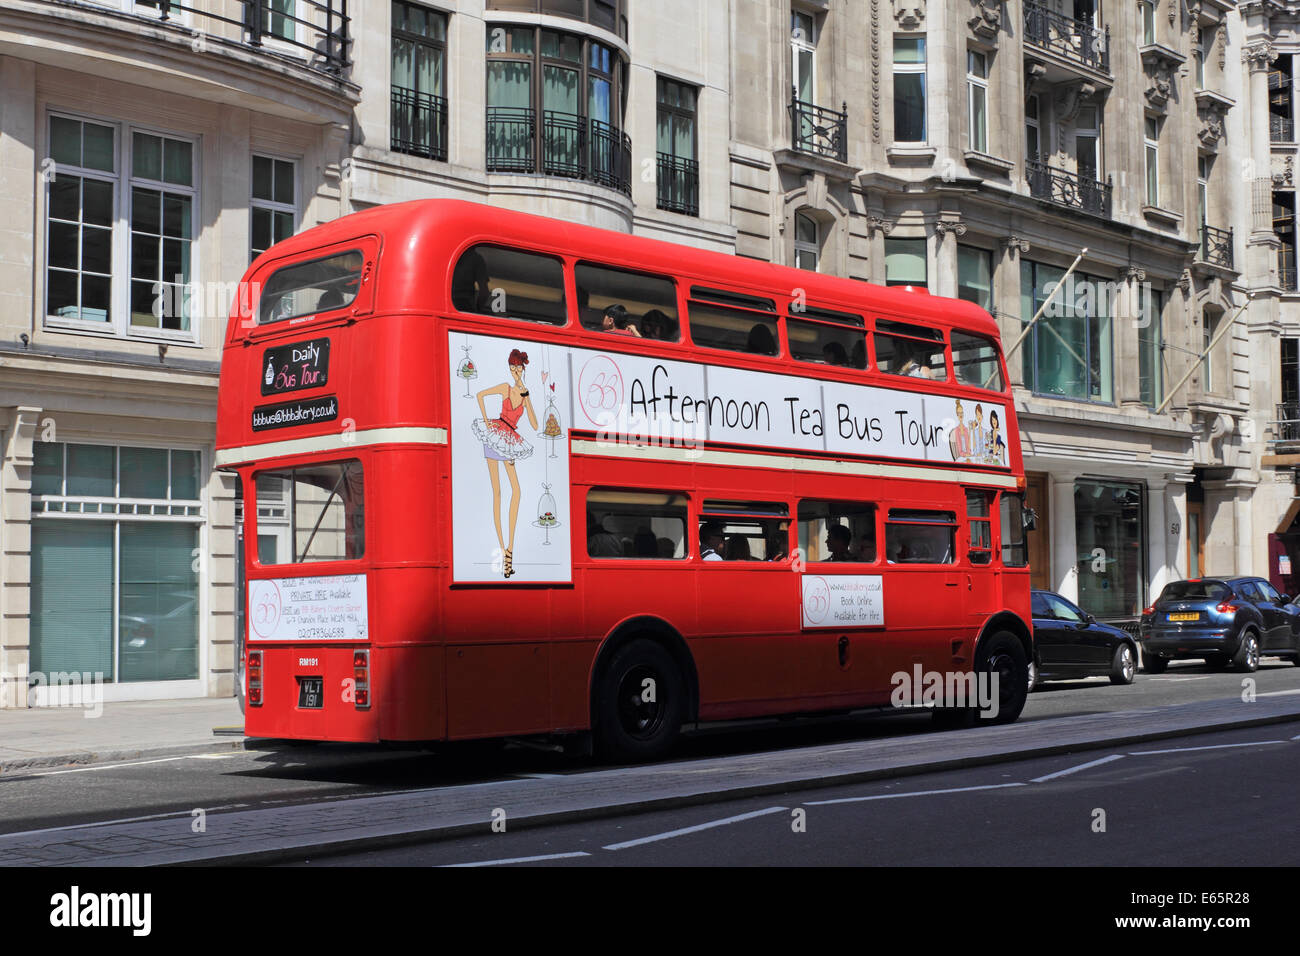 Red double decker bus, Pall Mall, London, England, UK Stock Photo